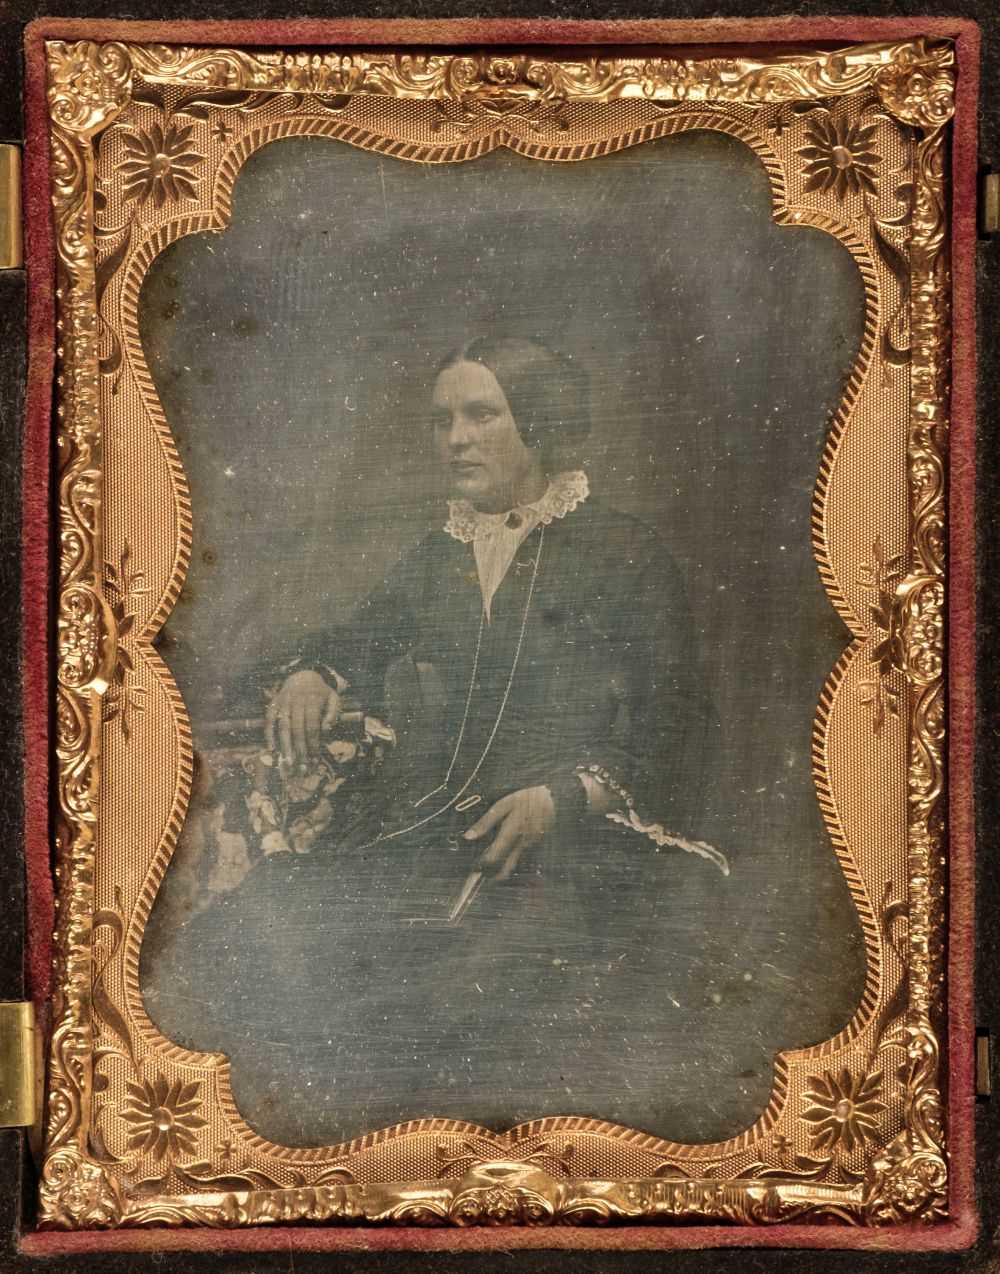 Lot 30 - Daguerreotypes. A one-quarter plate daguerreotype of a seated young woman holding a book, circa 1860